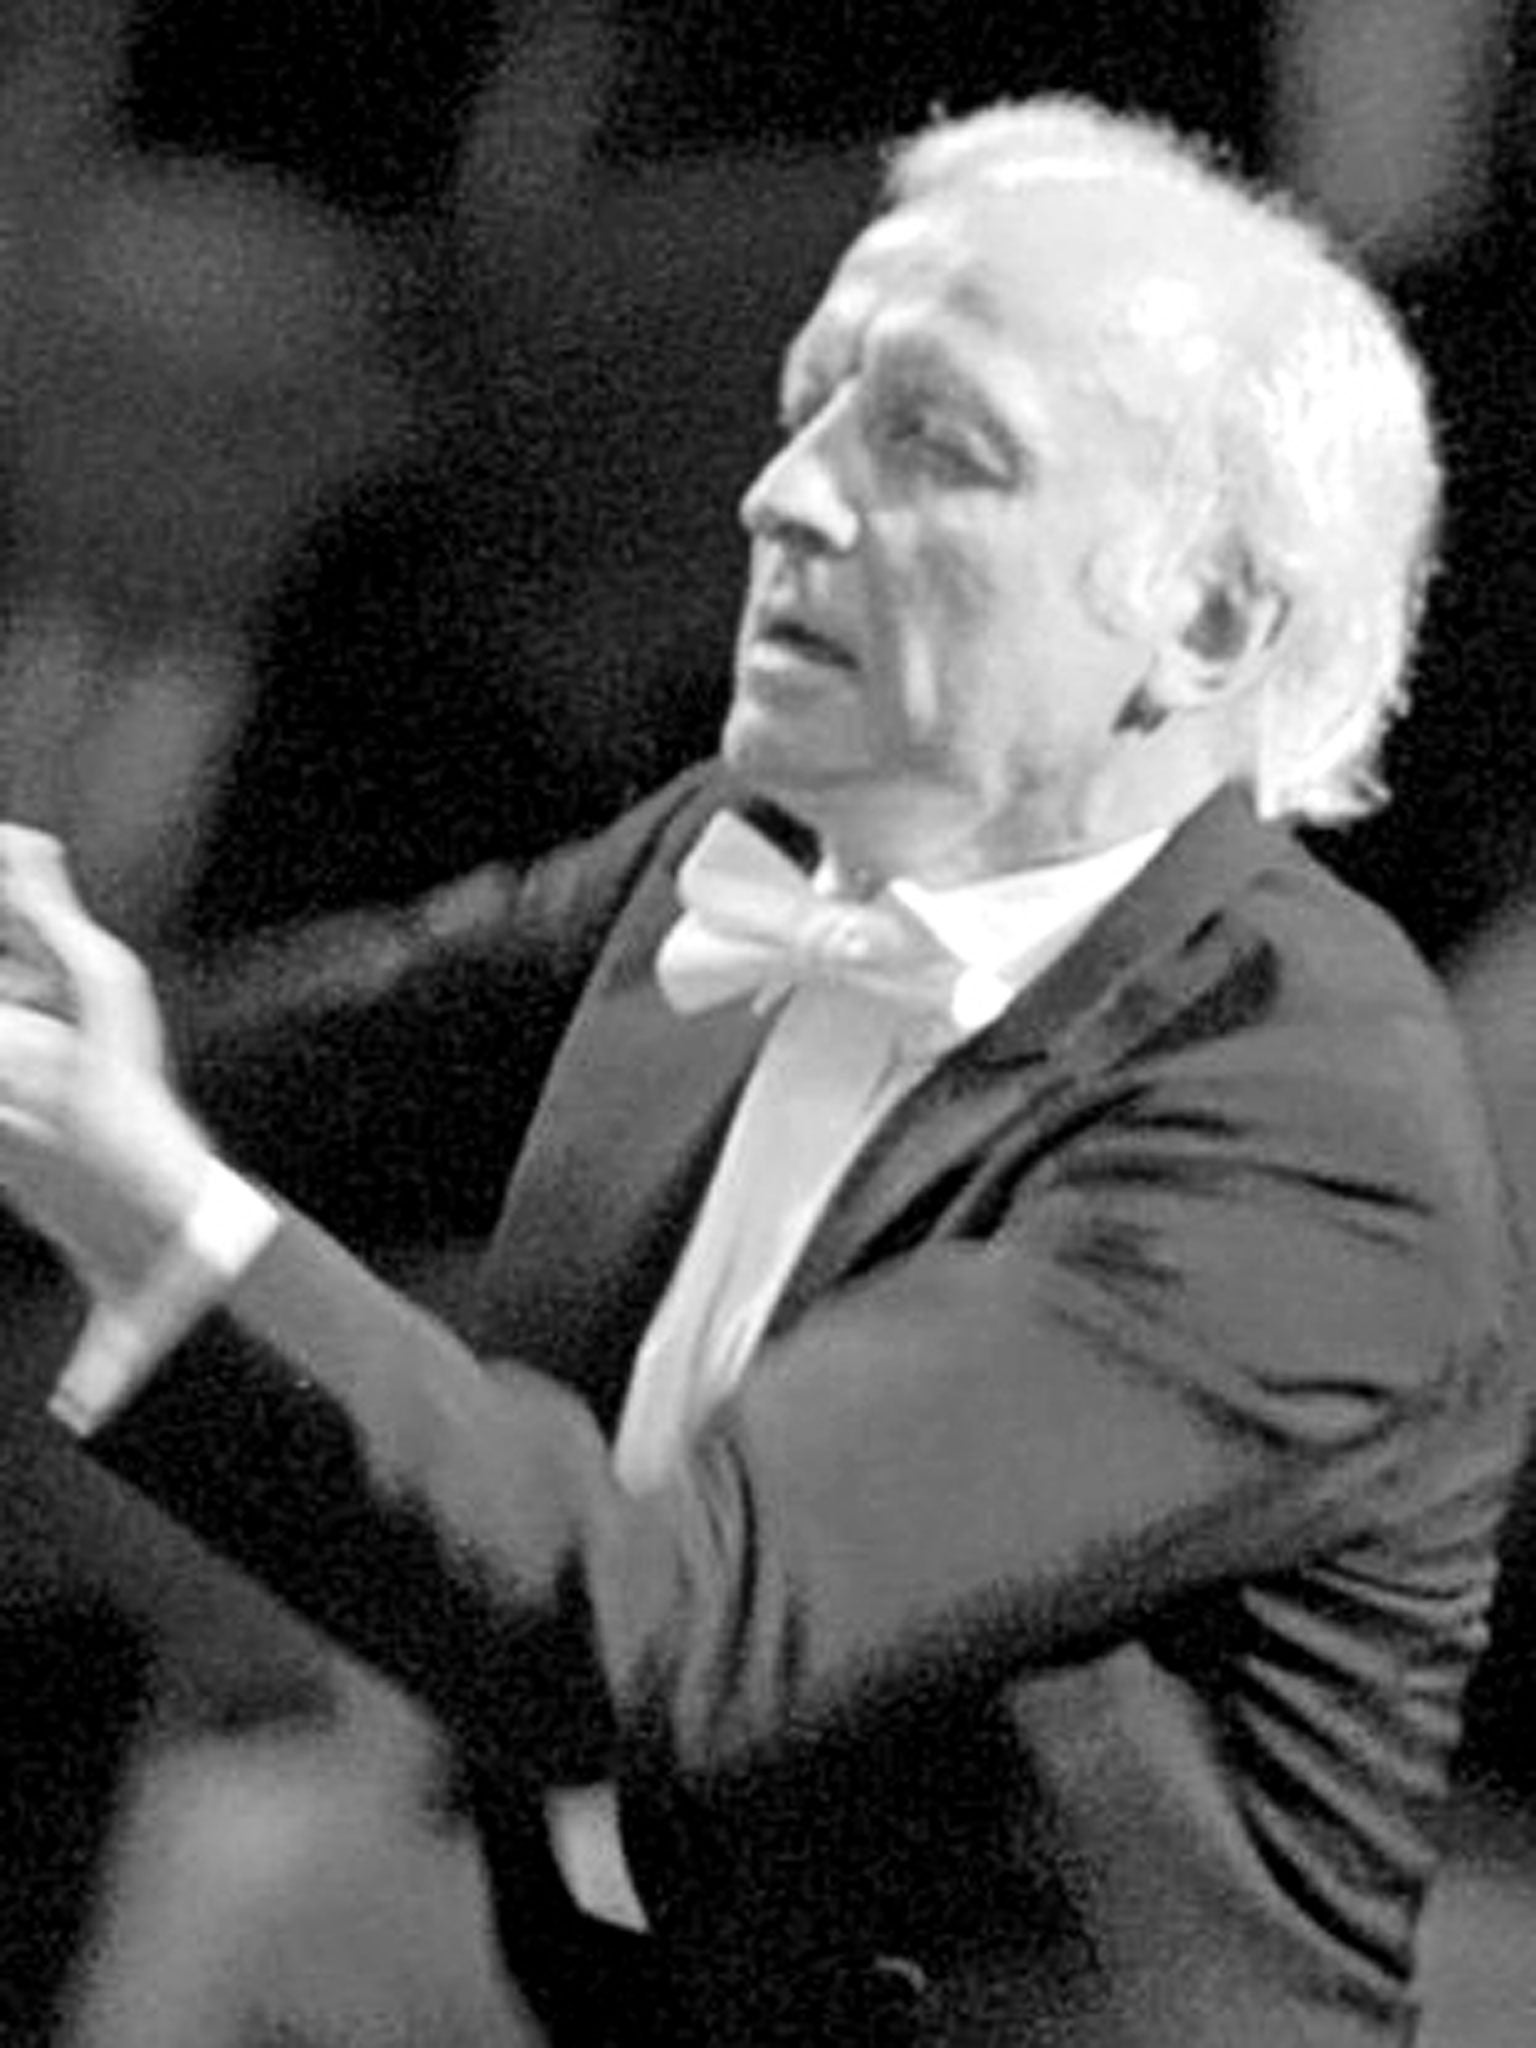 Albrecht conducts the Czech Philharmonic Orchestra in Prague in 1996